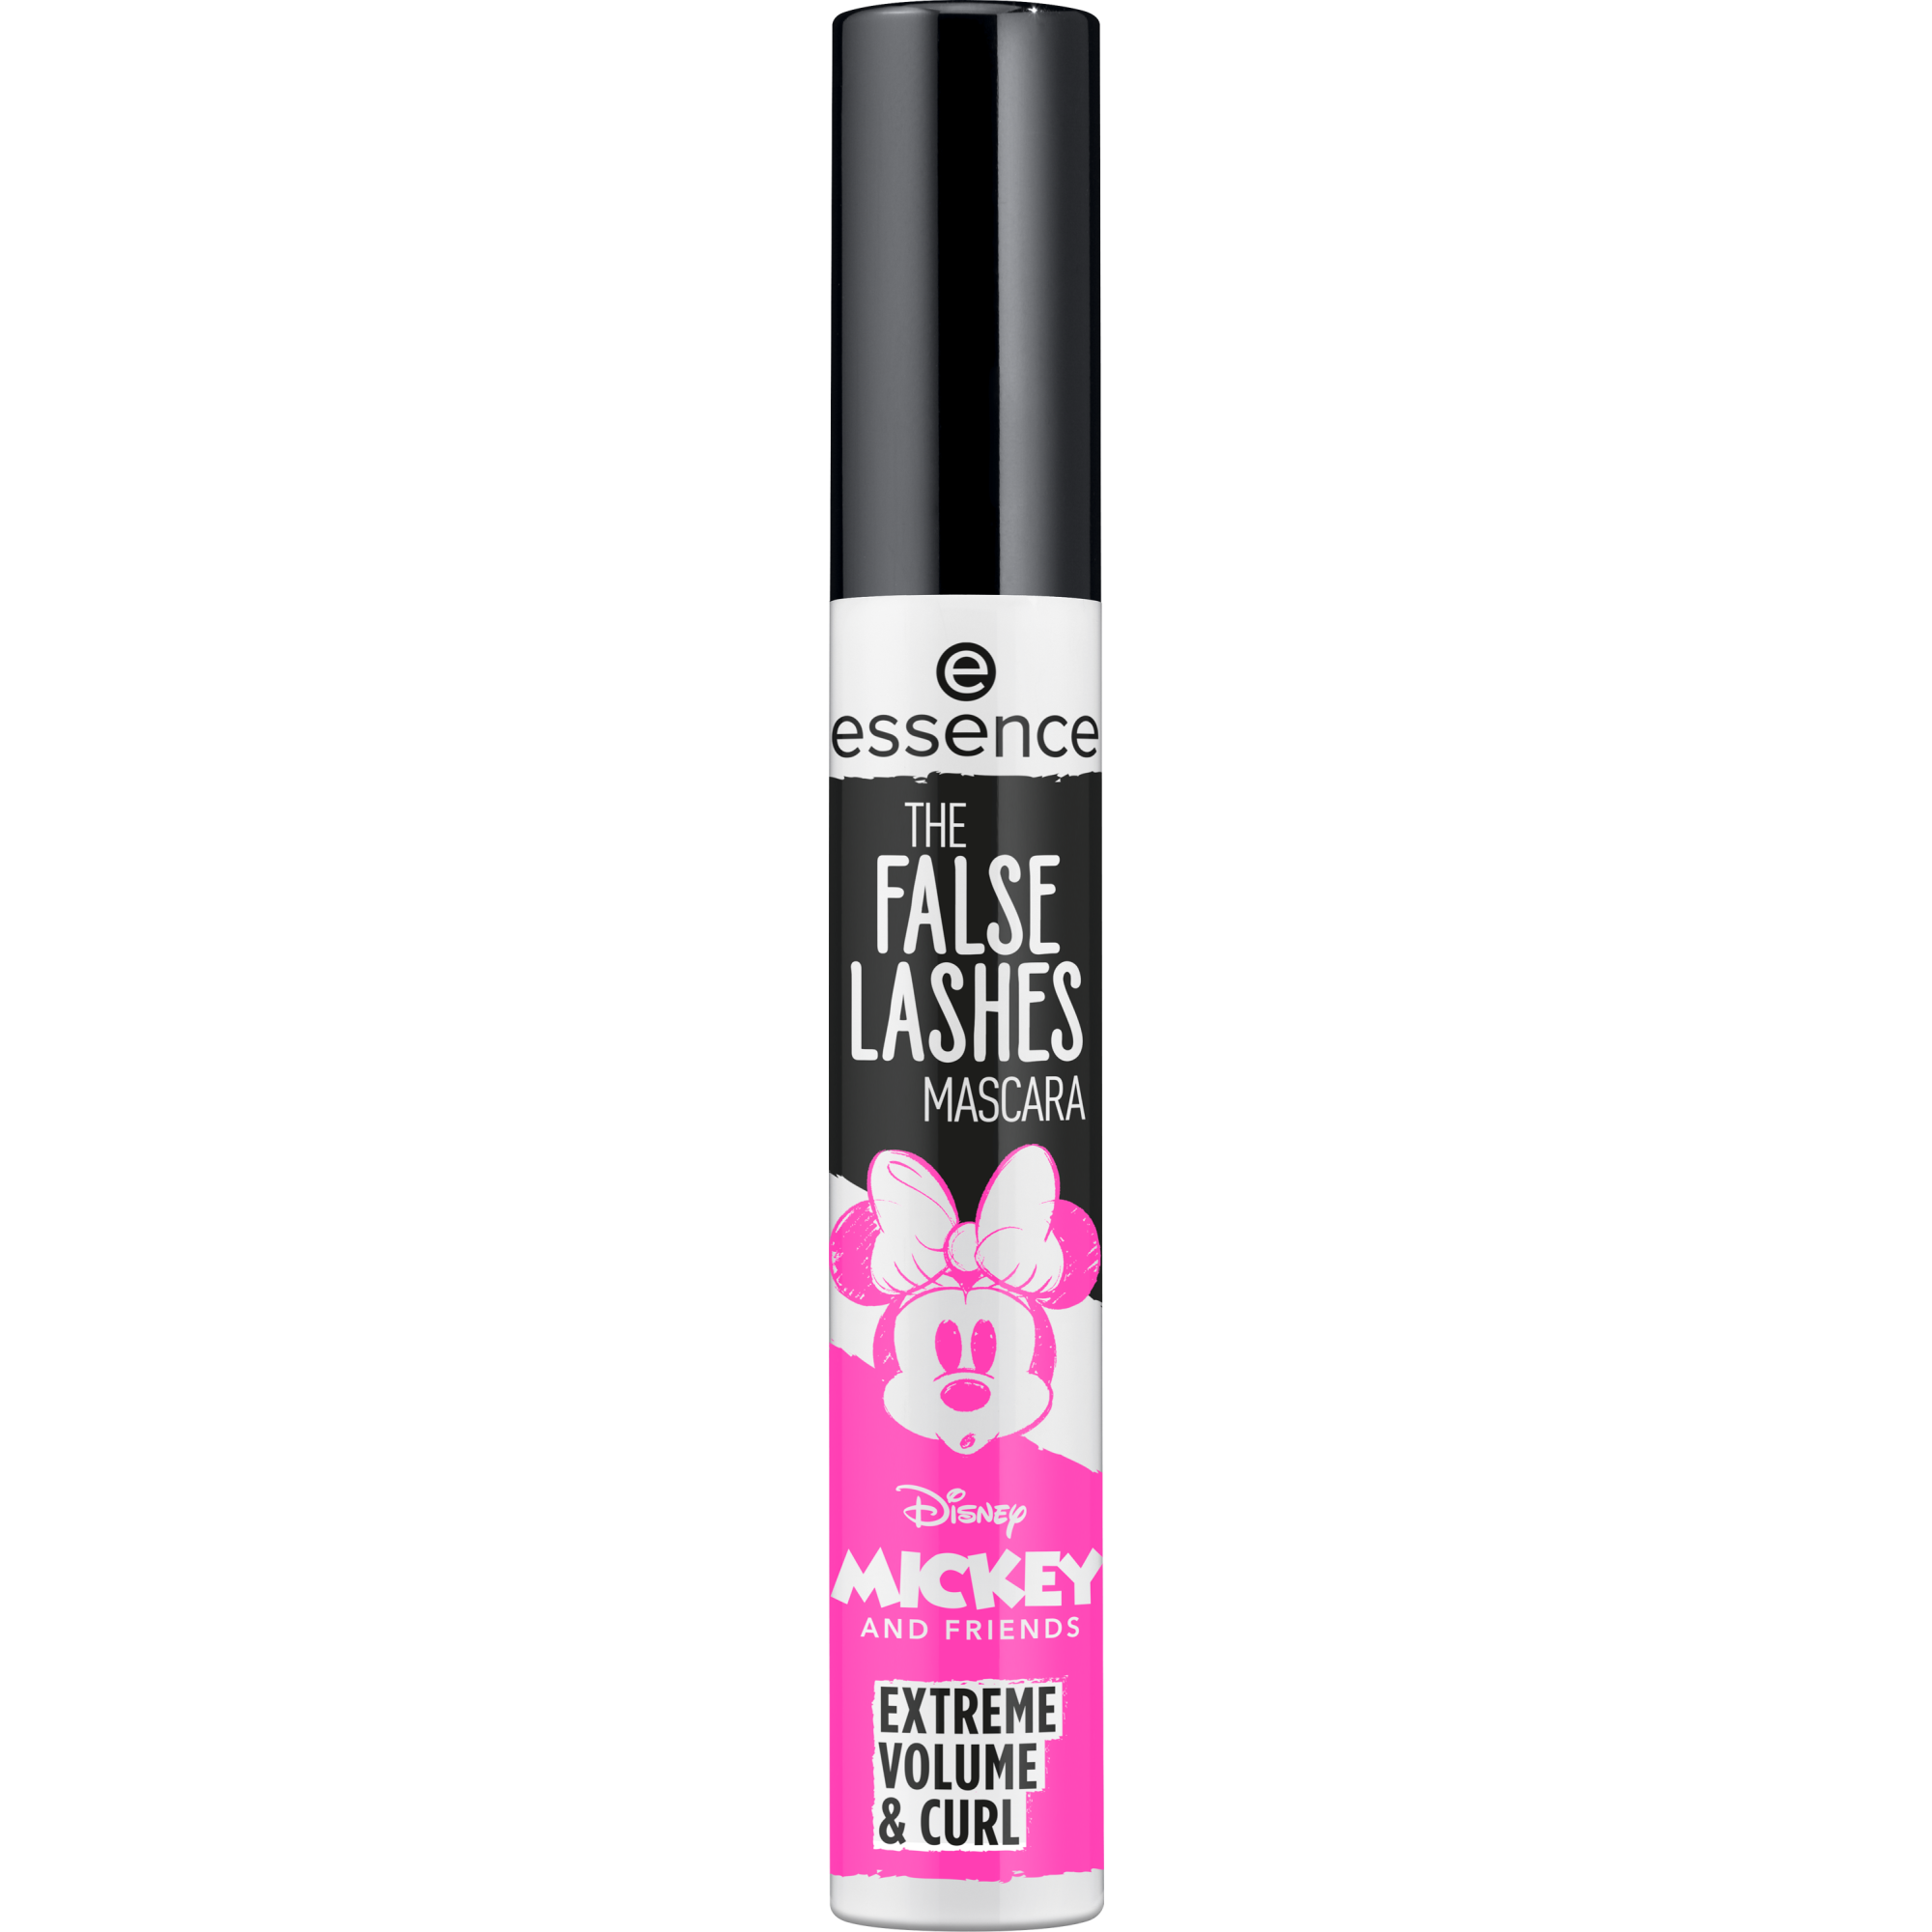 Disney Mickey and Friends THE FALSE LASHES MASCARA EXTREME VOLUME & CURL